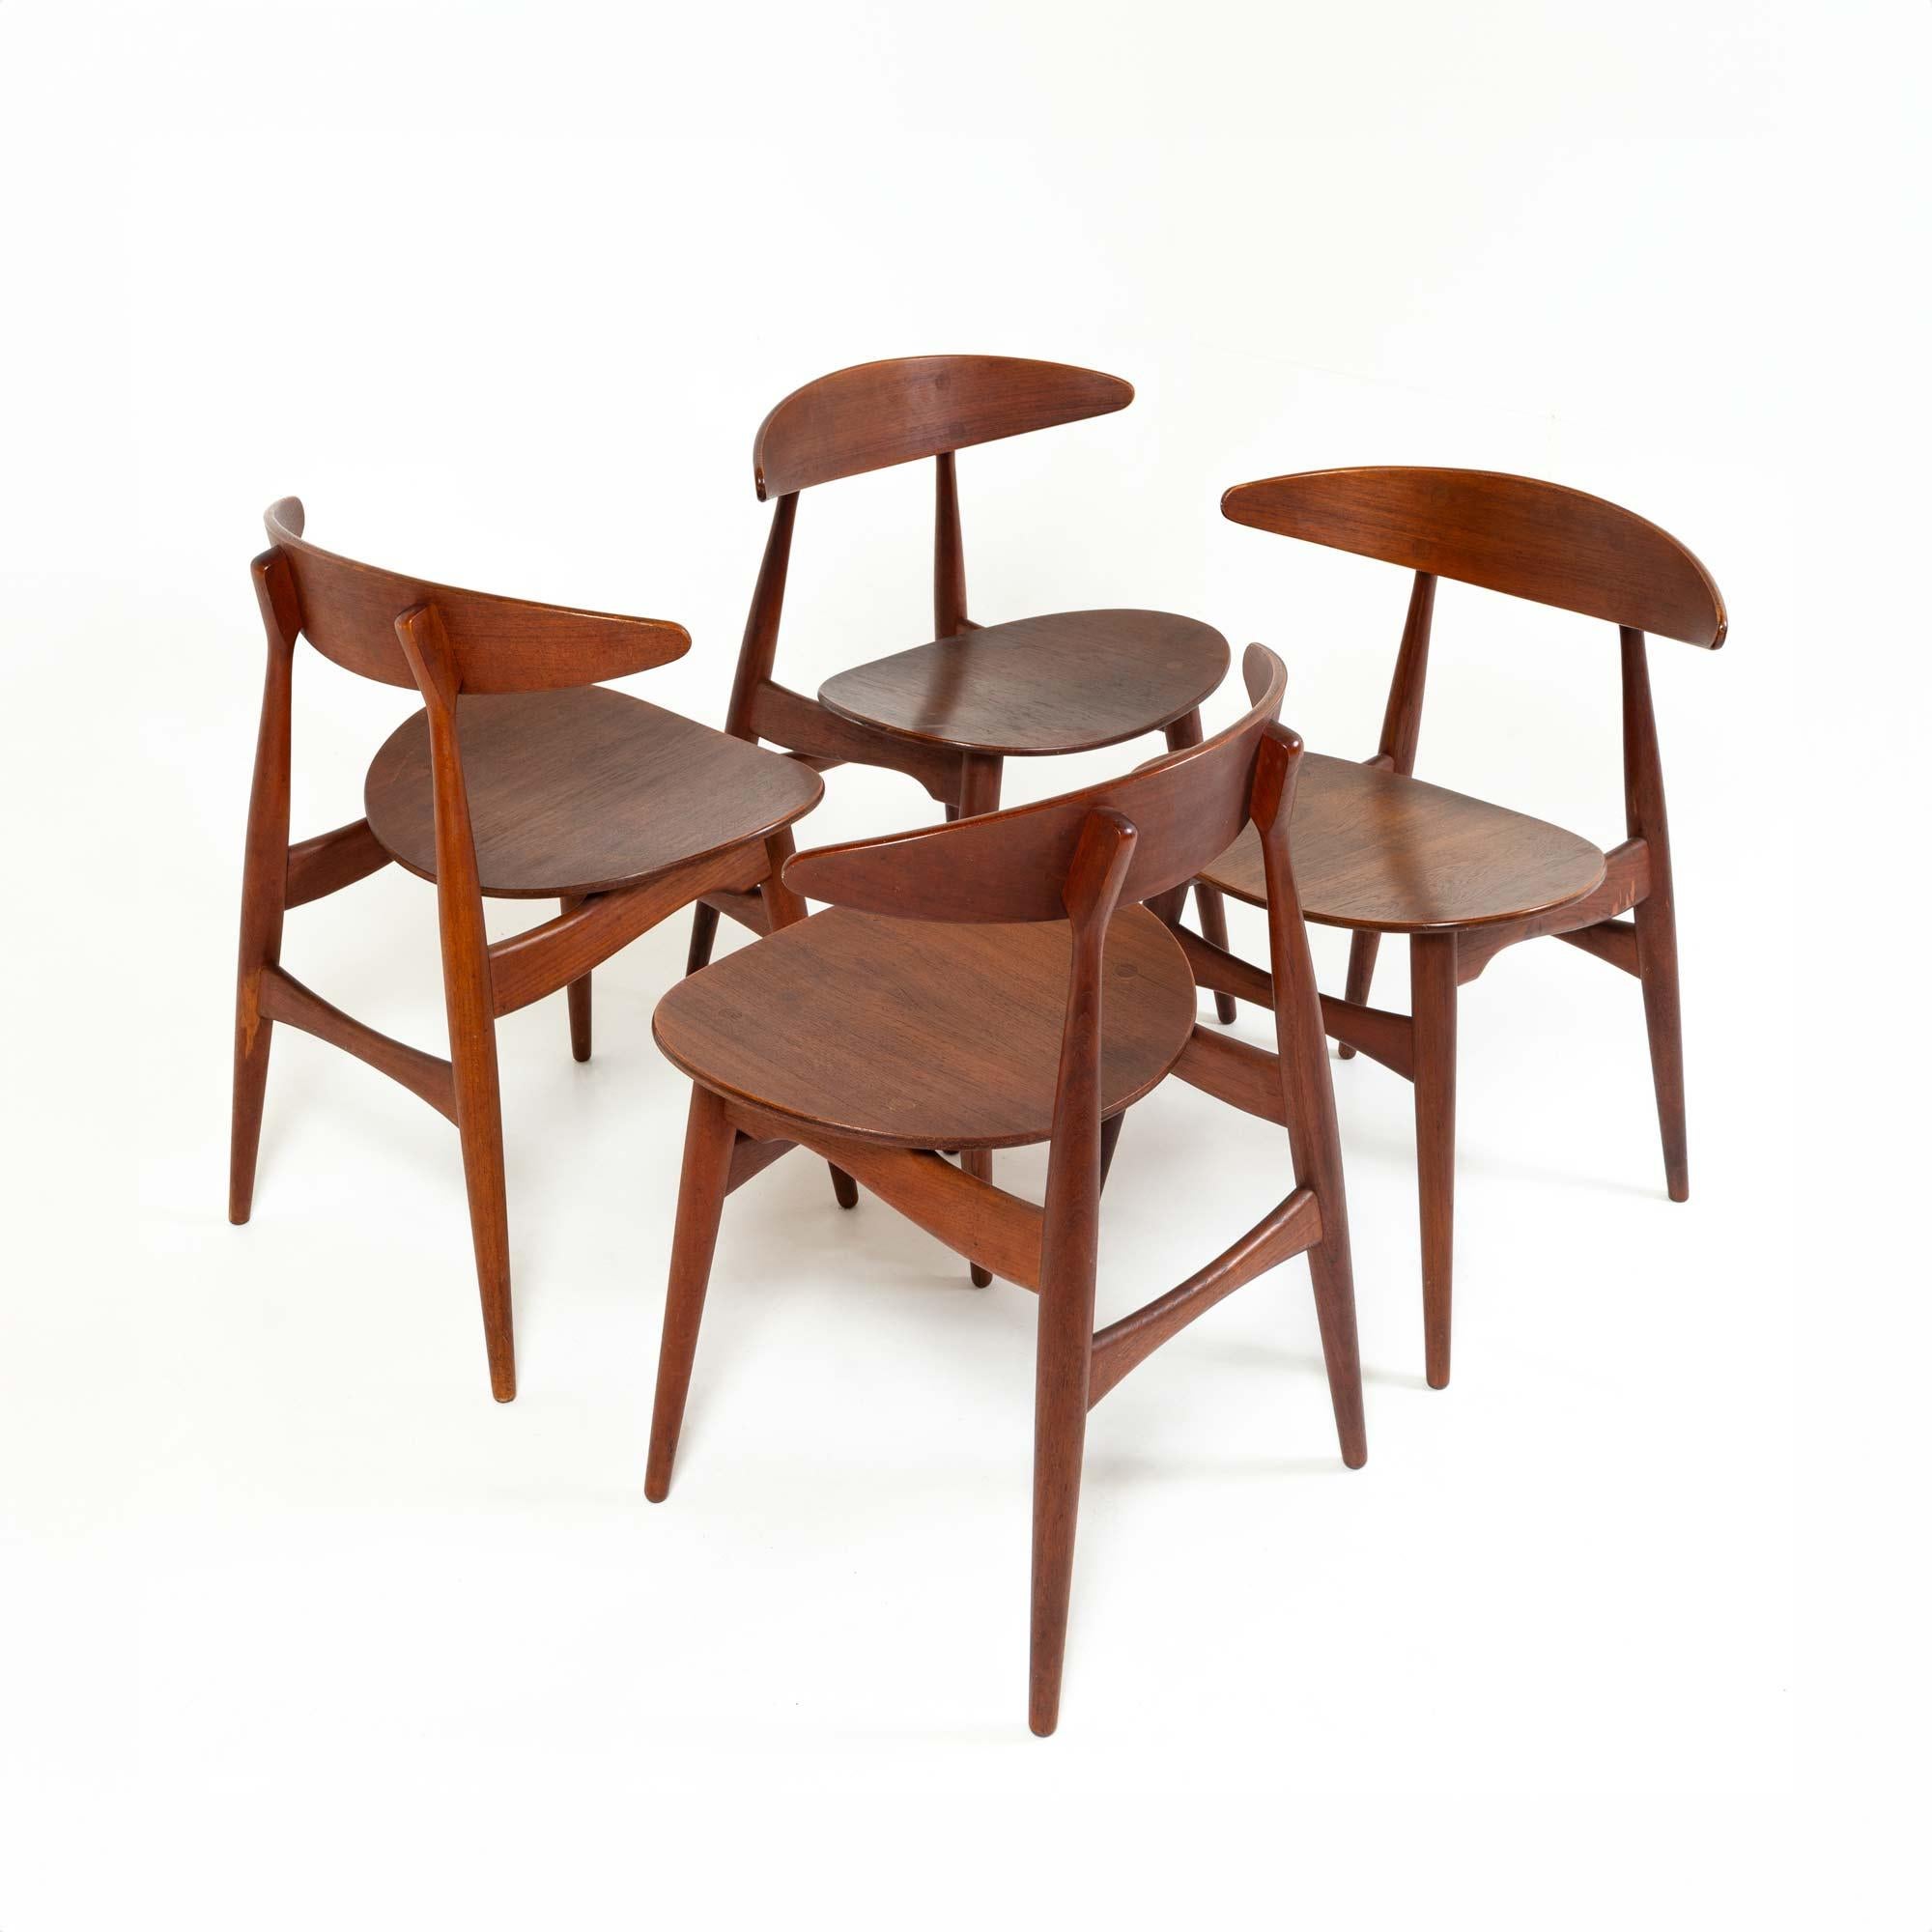 Set of 4 Hans Wegner for Carl Hansen & Son CH-33 Chairs in Teak In Good Condition For Sale In Seattle, WA